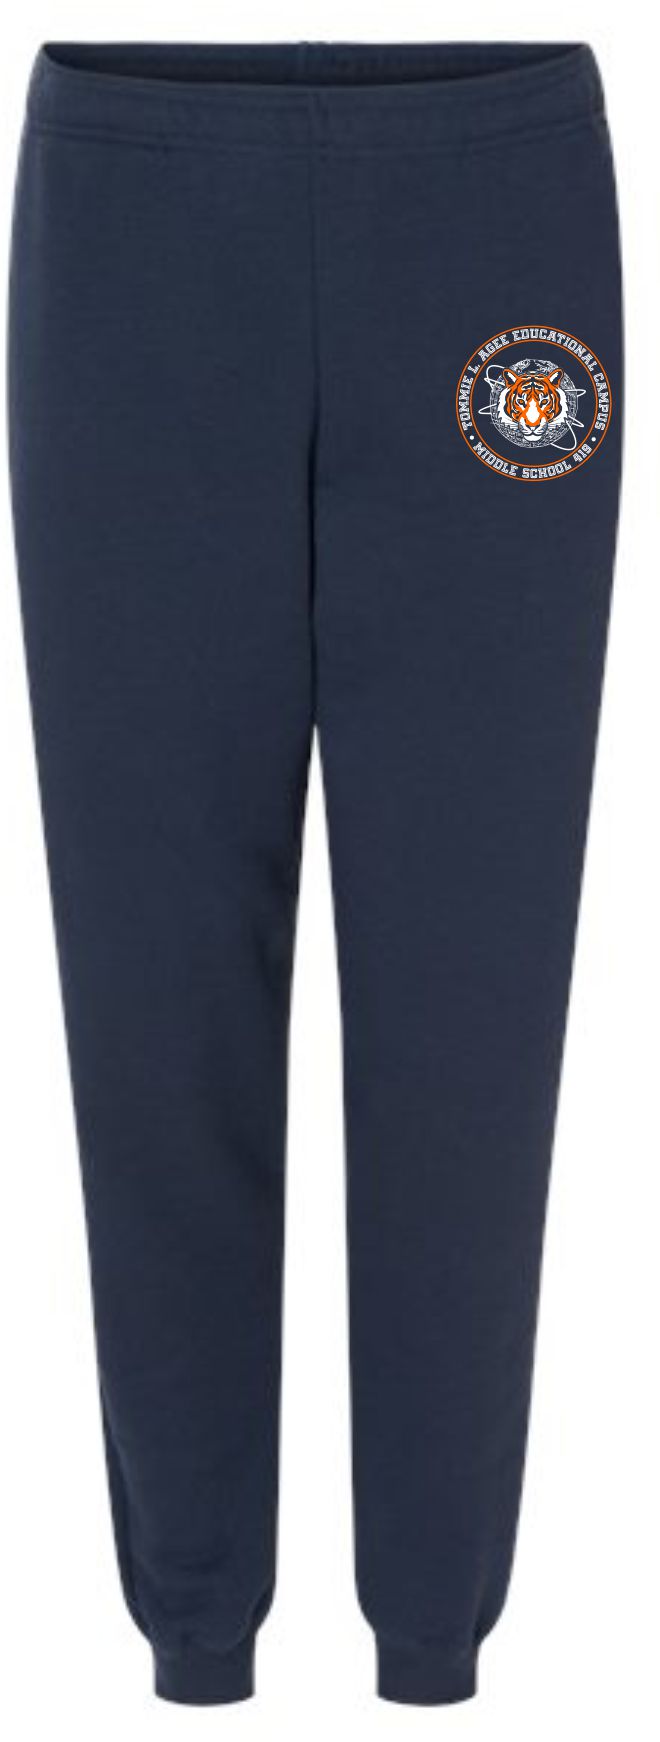 MS419-The Tommie L. Agee Ed. Campus - Jogger Sweatpant